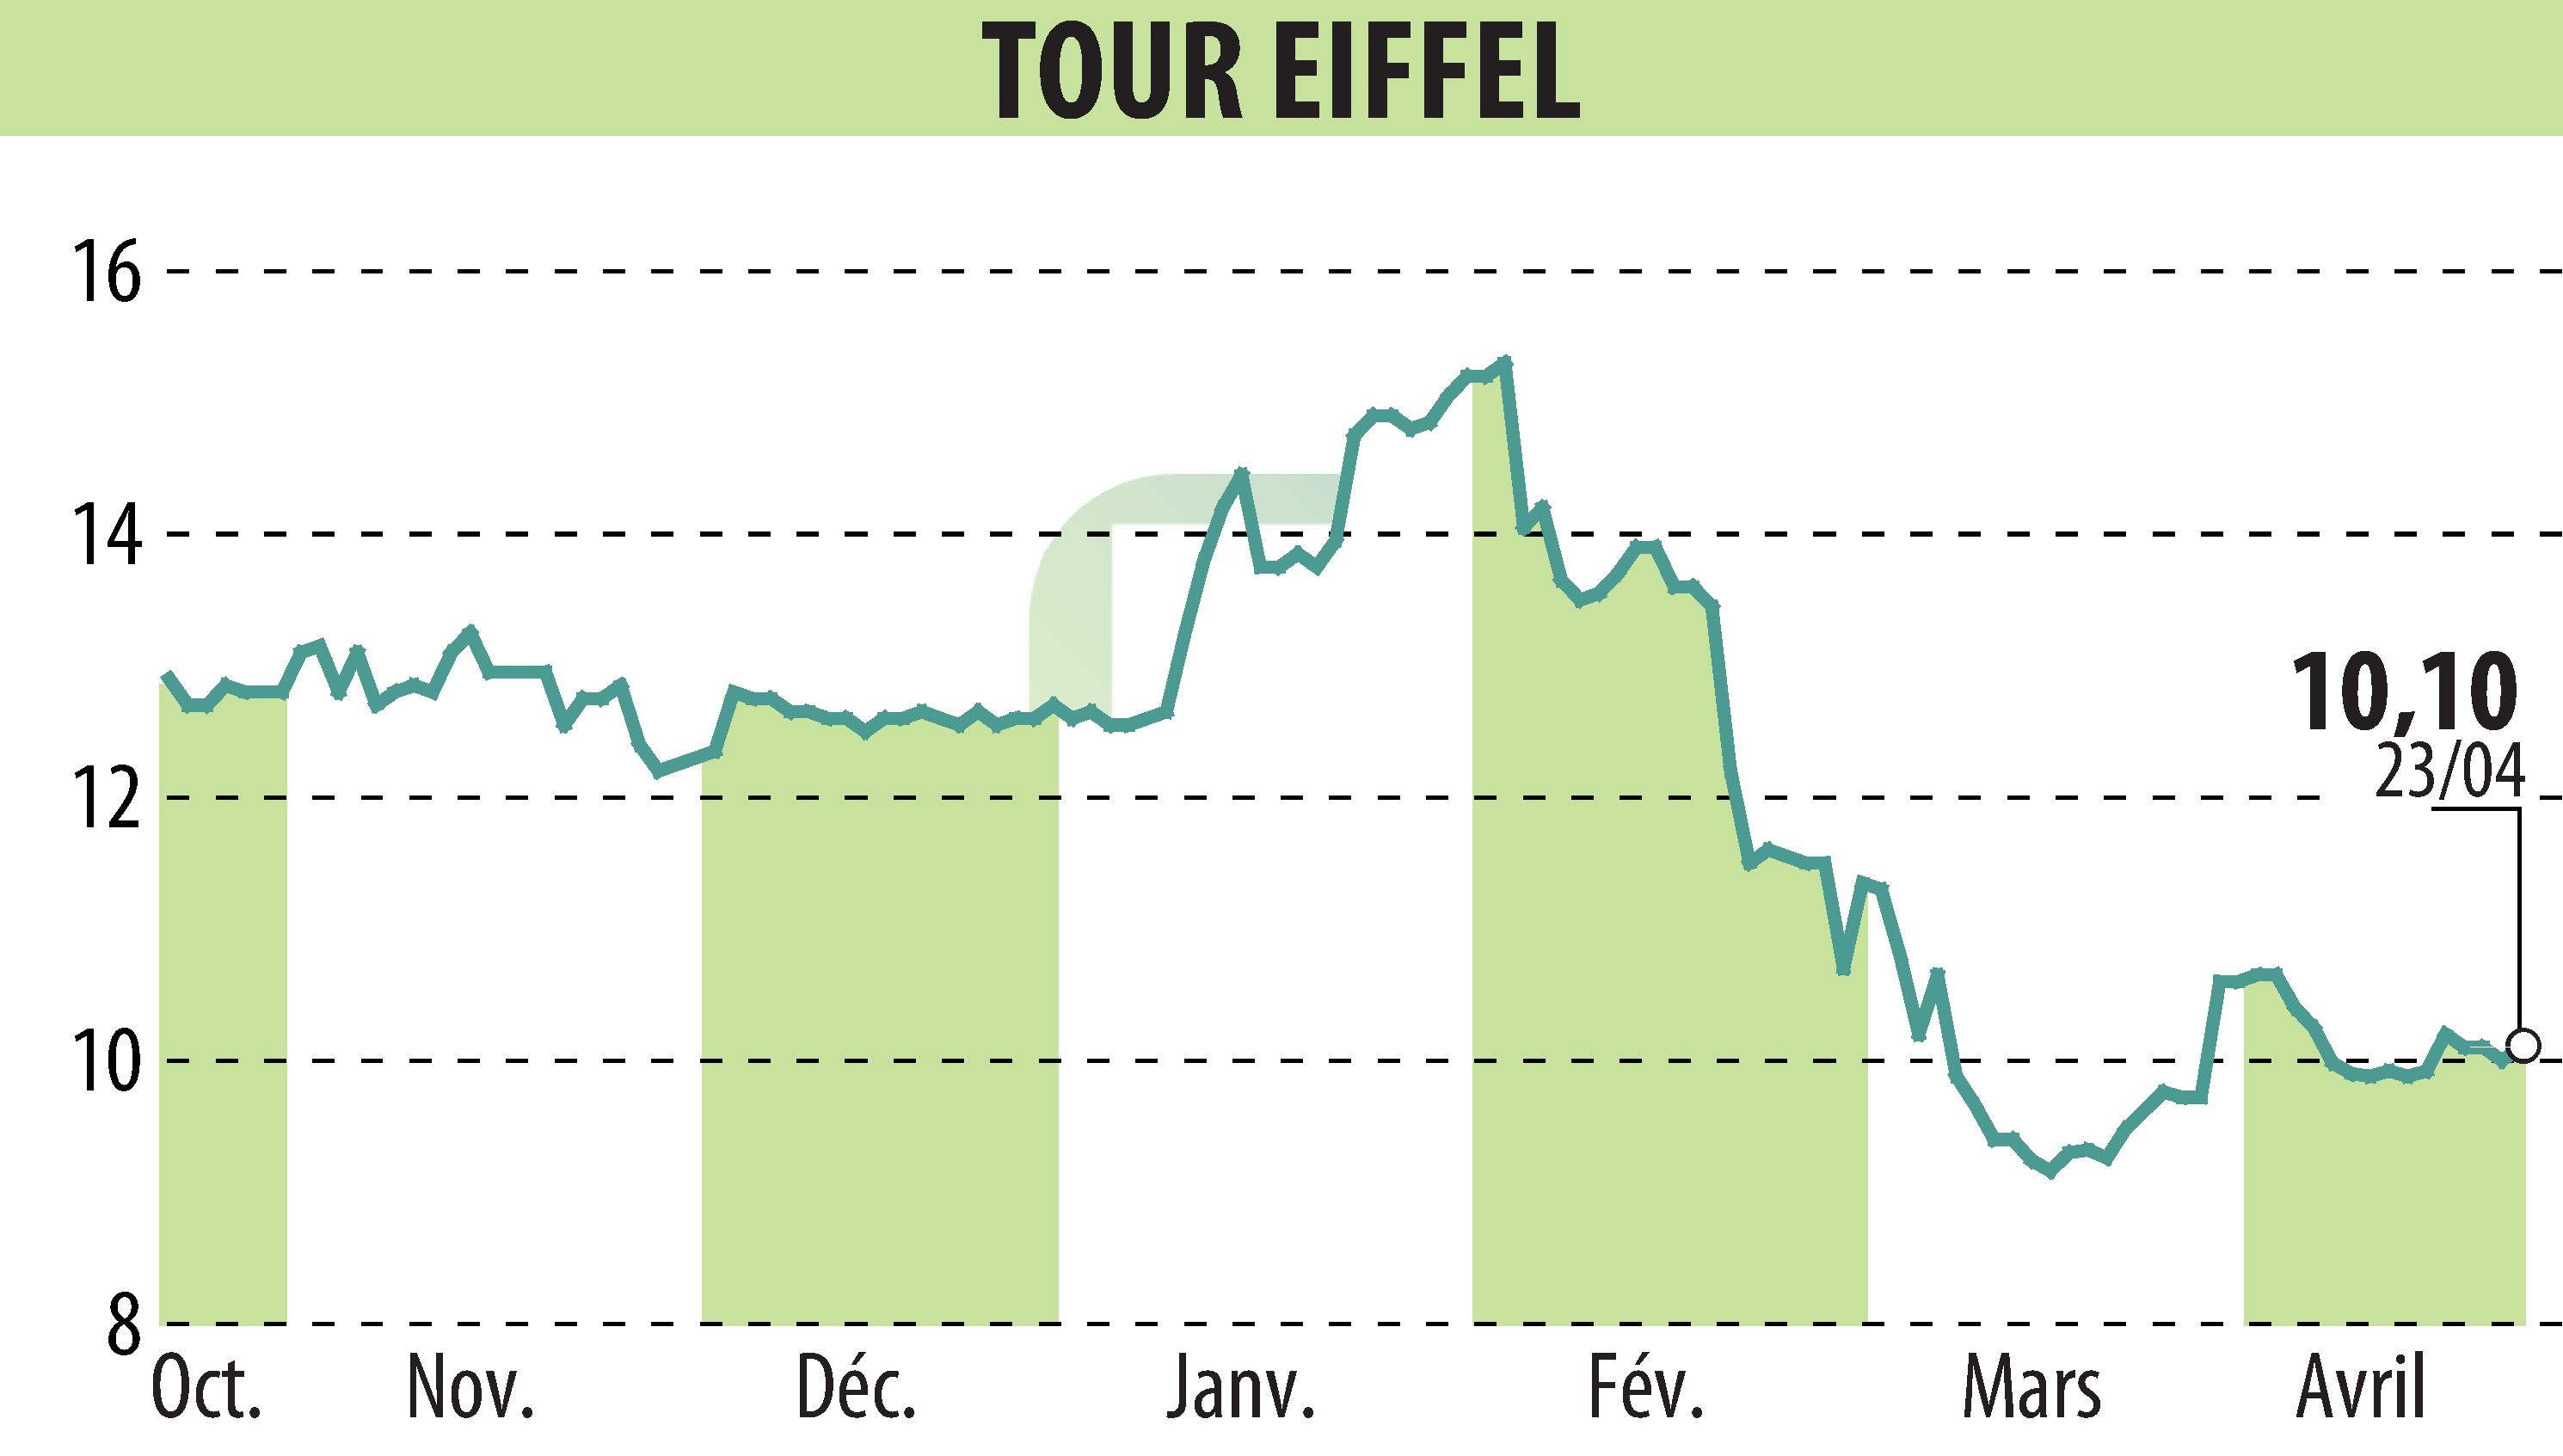 Stock price chart of TOUR EIFFEL (EPA:EIFF) showing fluctuations.